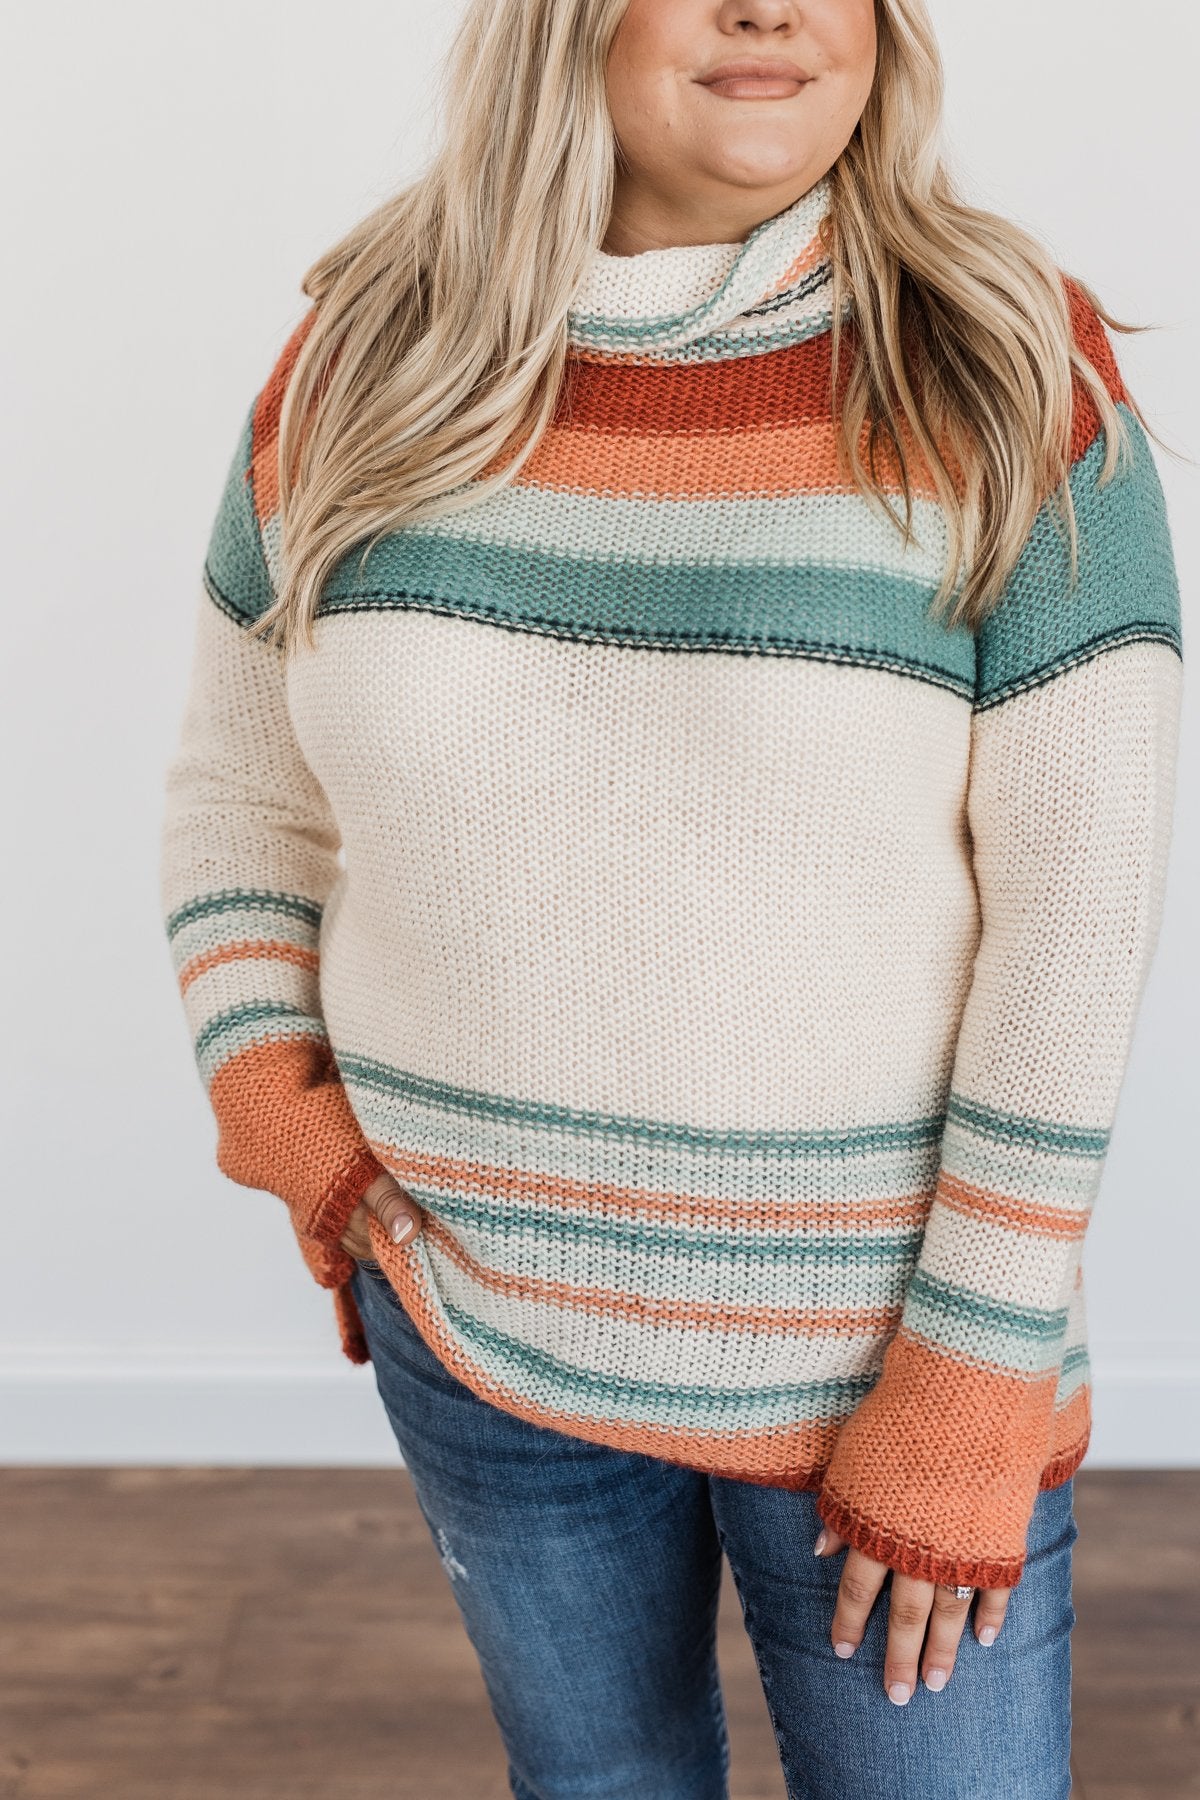 Harvest Happiness Cowl Neck Sweater- Cream, Rust & Dusty Teal